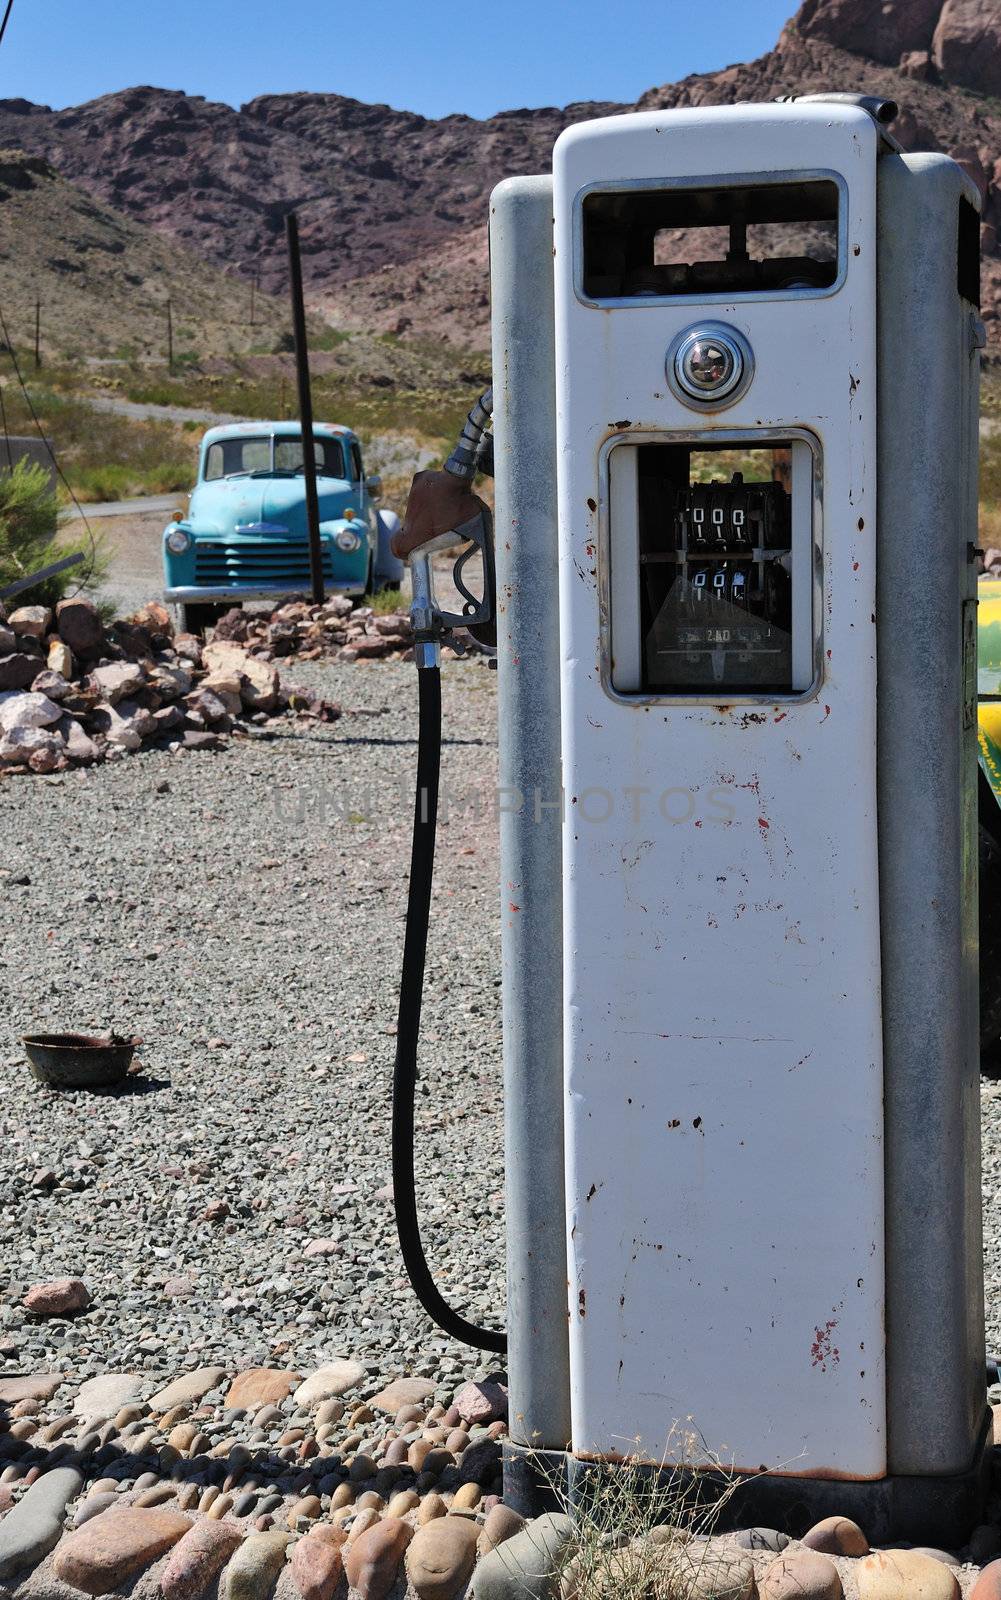 old time vintage gas pump in the middle of no-where with mountain view and a beatup old truck